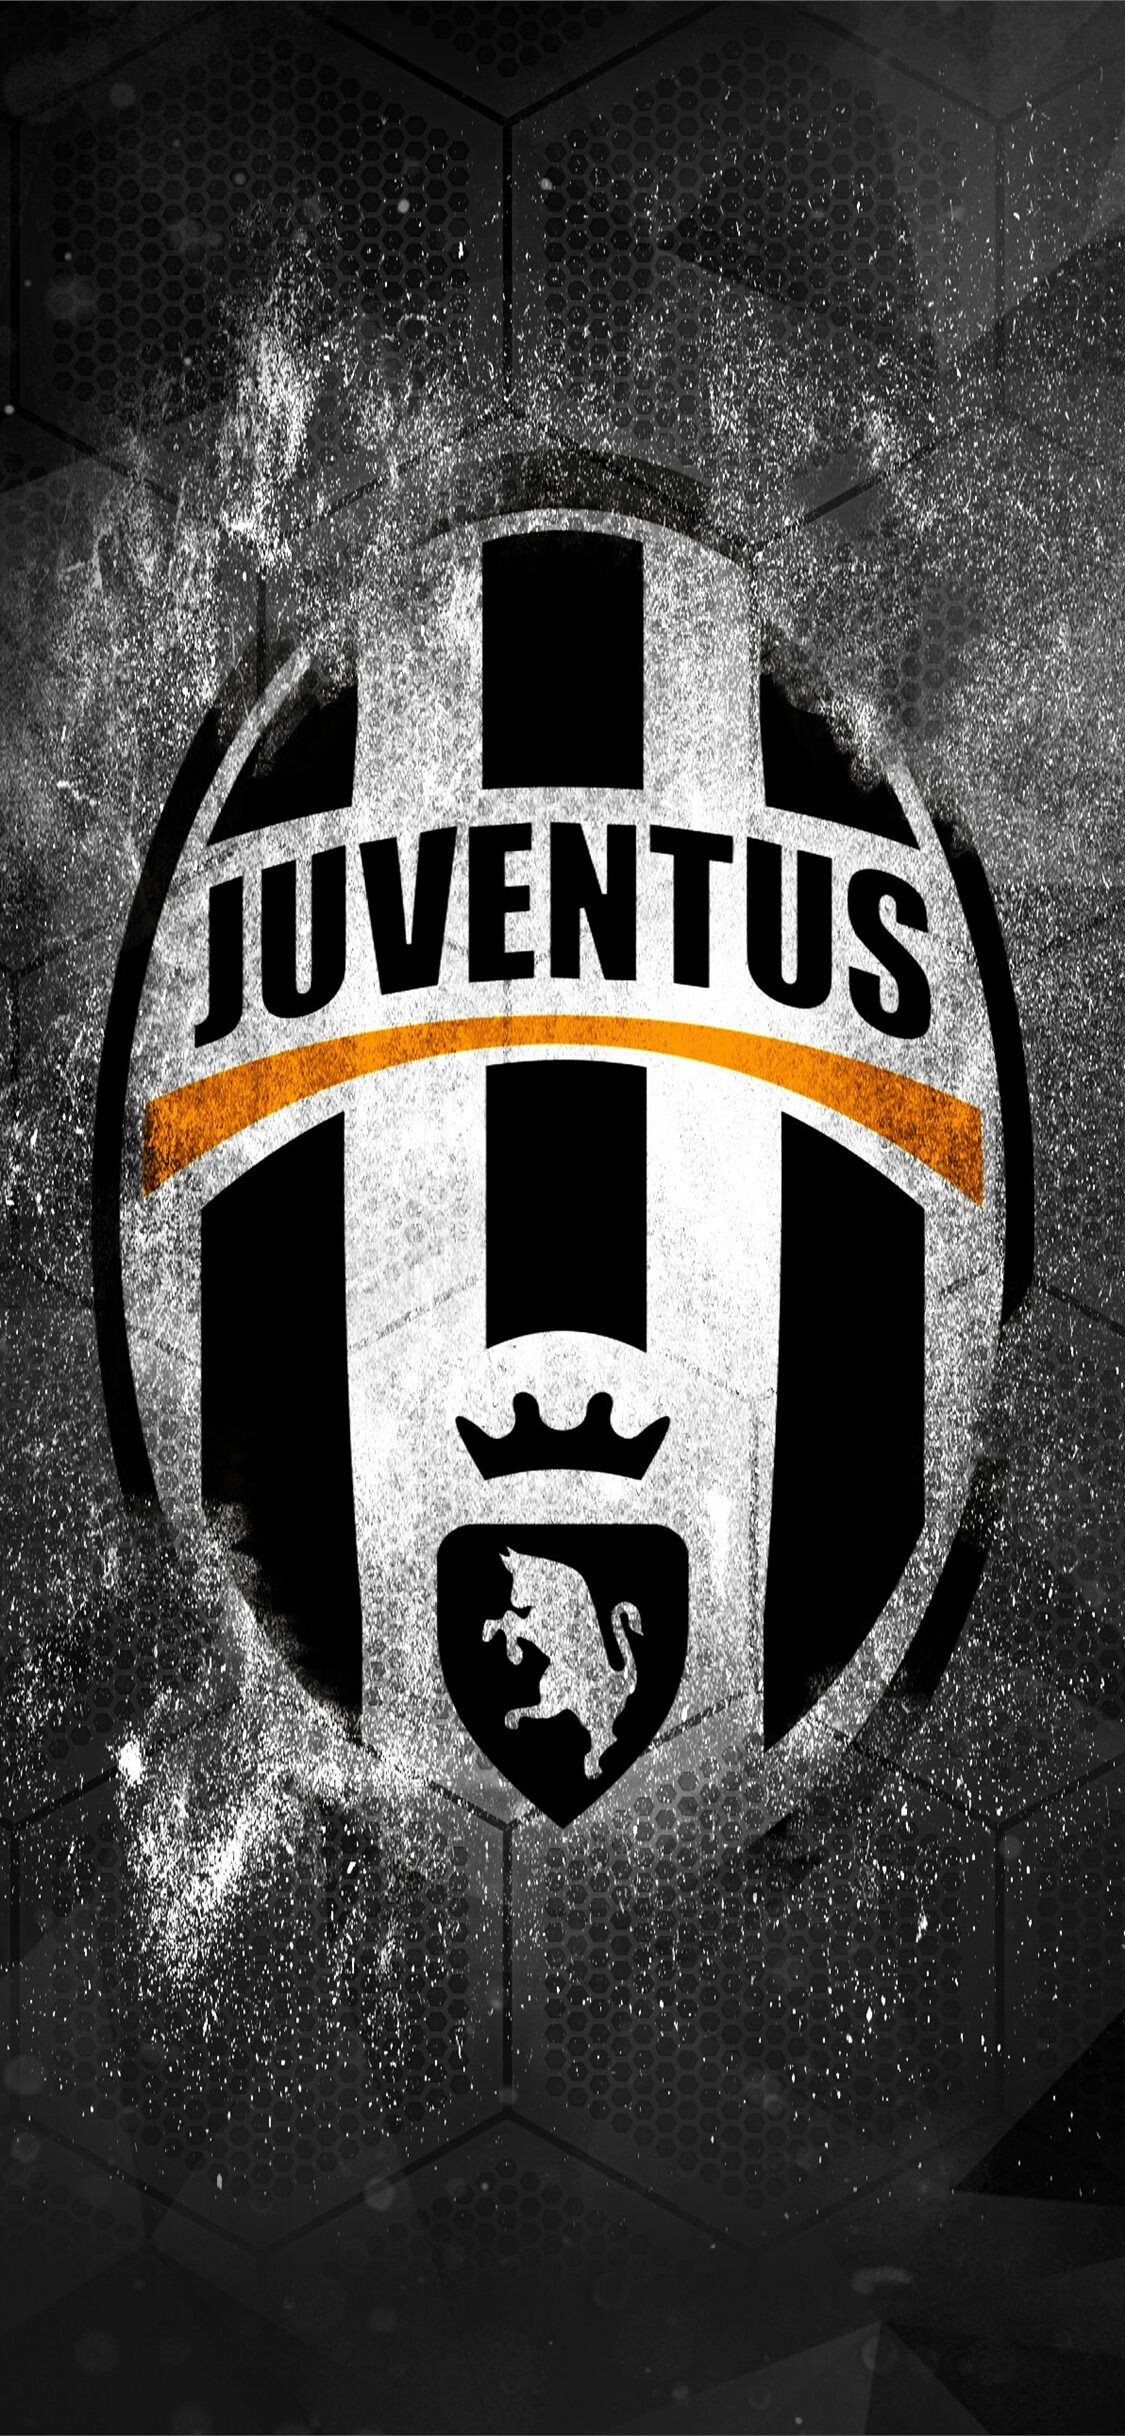 Forza Juve, Juventus logo wallpapers, Stylish and cool, Fan favorite, 1130x2440 HD Phone